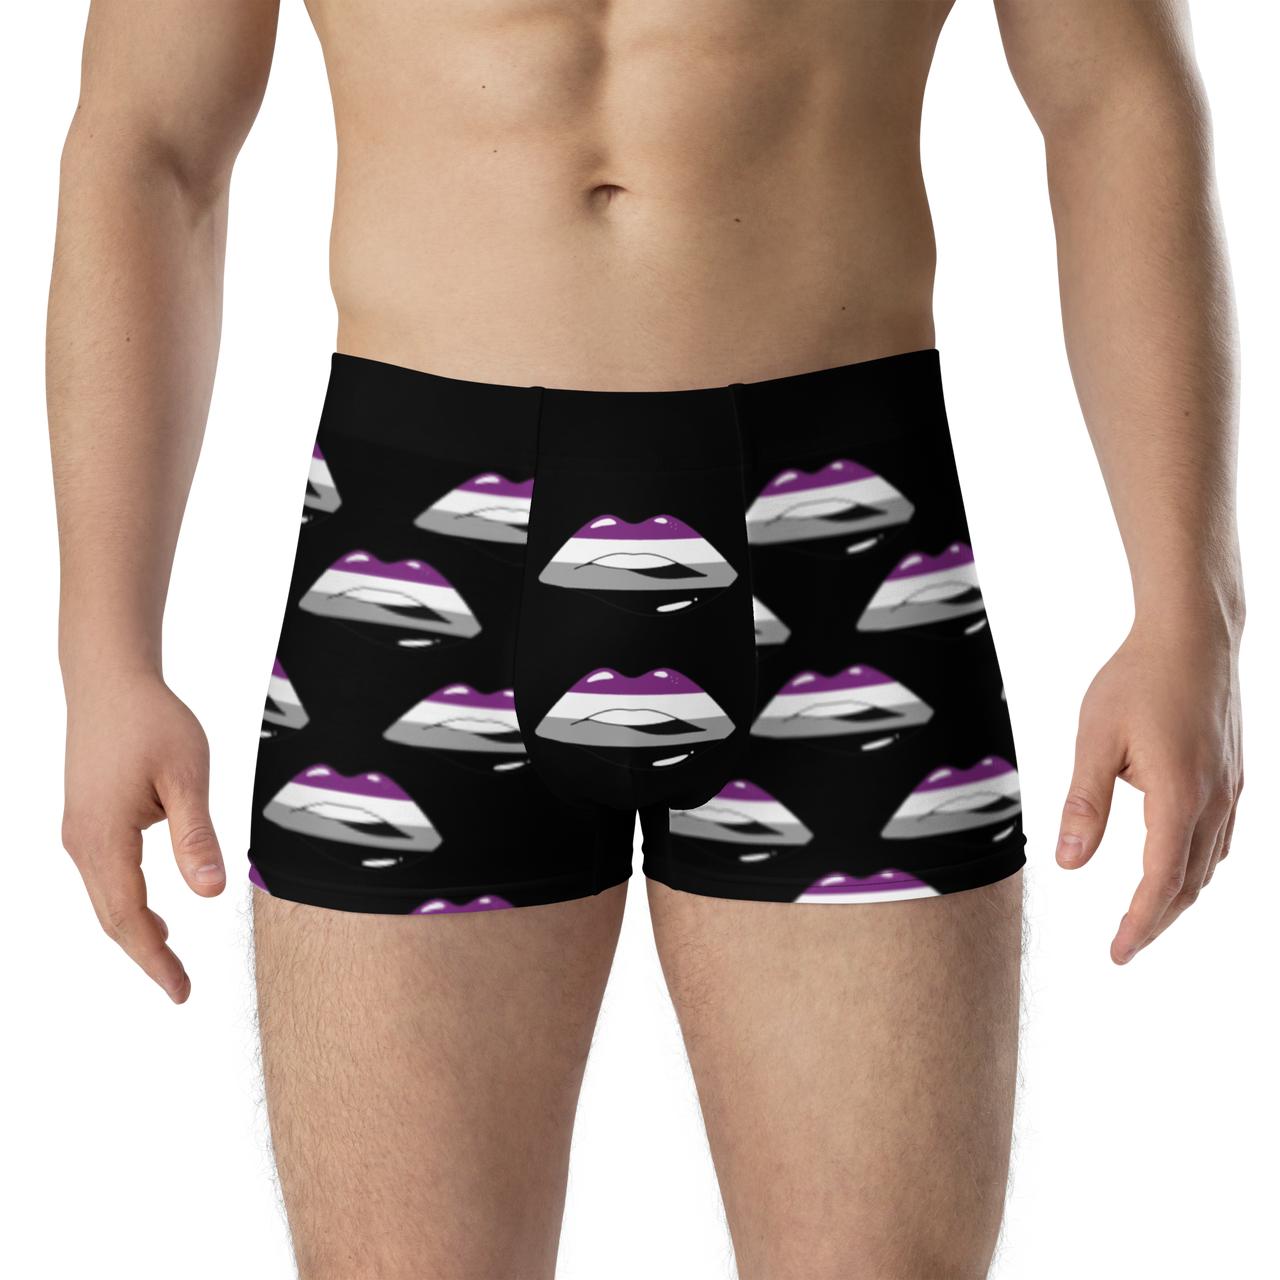 Asexual Flag LGBTQ Kisses Underwear for Her/Him or They/Them - Black SHAVA